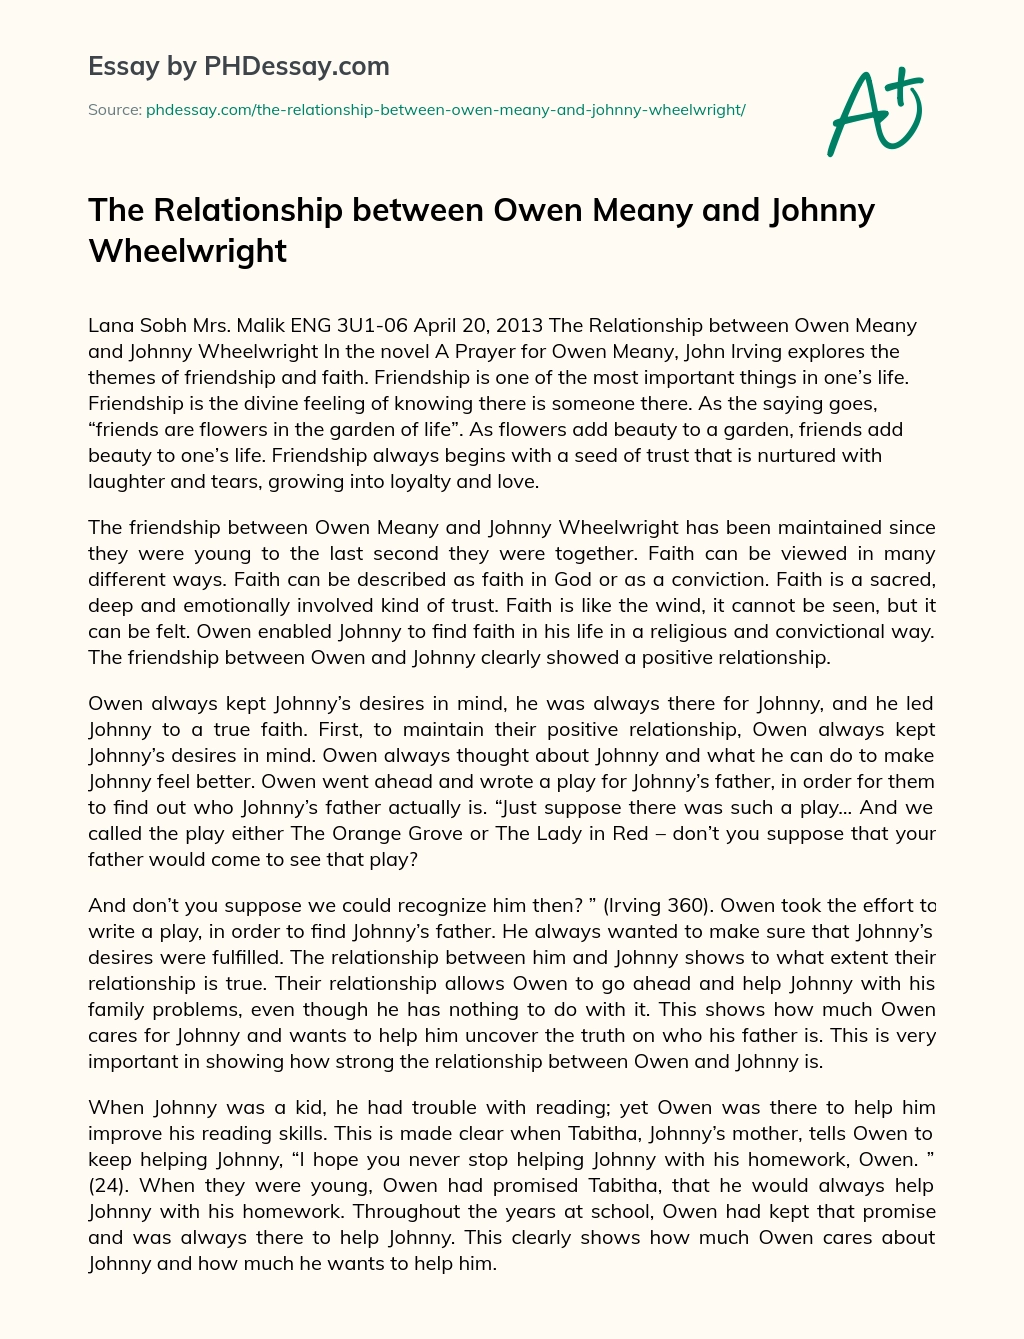 The Relationship between Owen Meany and Johnny Wheelwright essay